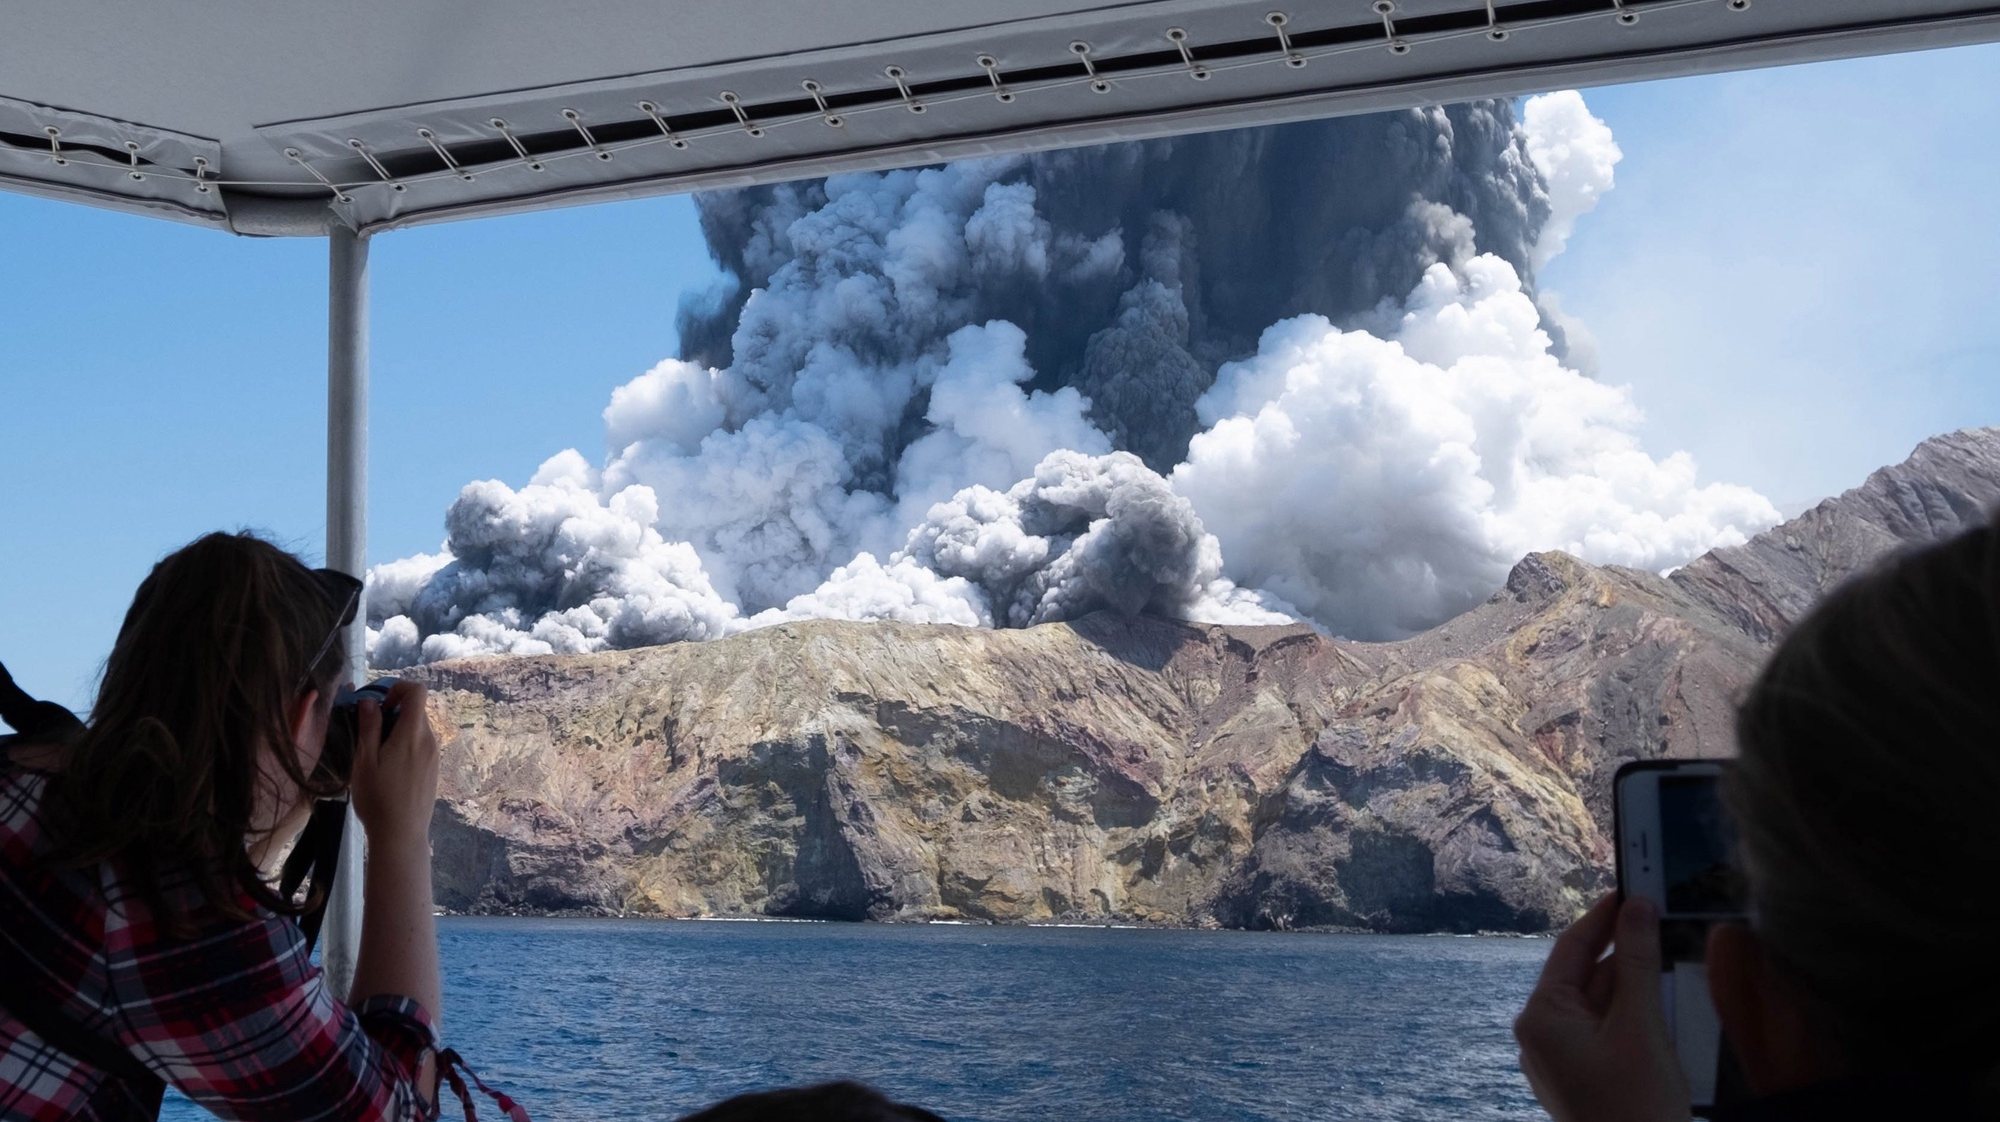 epa08087897 YEARENDER 2019 DECEMBER

White Island (Whakaari) volcano erupts in the Bay of Plenty, New Zealand, 09 December 2019. According to police, at least five people have died in the volcanic eruption at around 2:11 pm local time on 09 December. The island is located around 40 km offshore the Bay of Plenty.  EPA/Michael Schade MANDATORY CREDIT: MICHAEL SCHADE  EDITORIAL USE ONLY/NO SALES  EDITORIAL USE ONLY/NO SALES